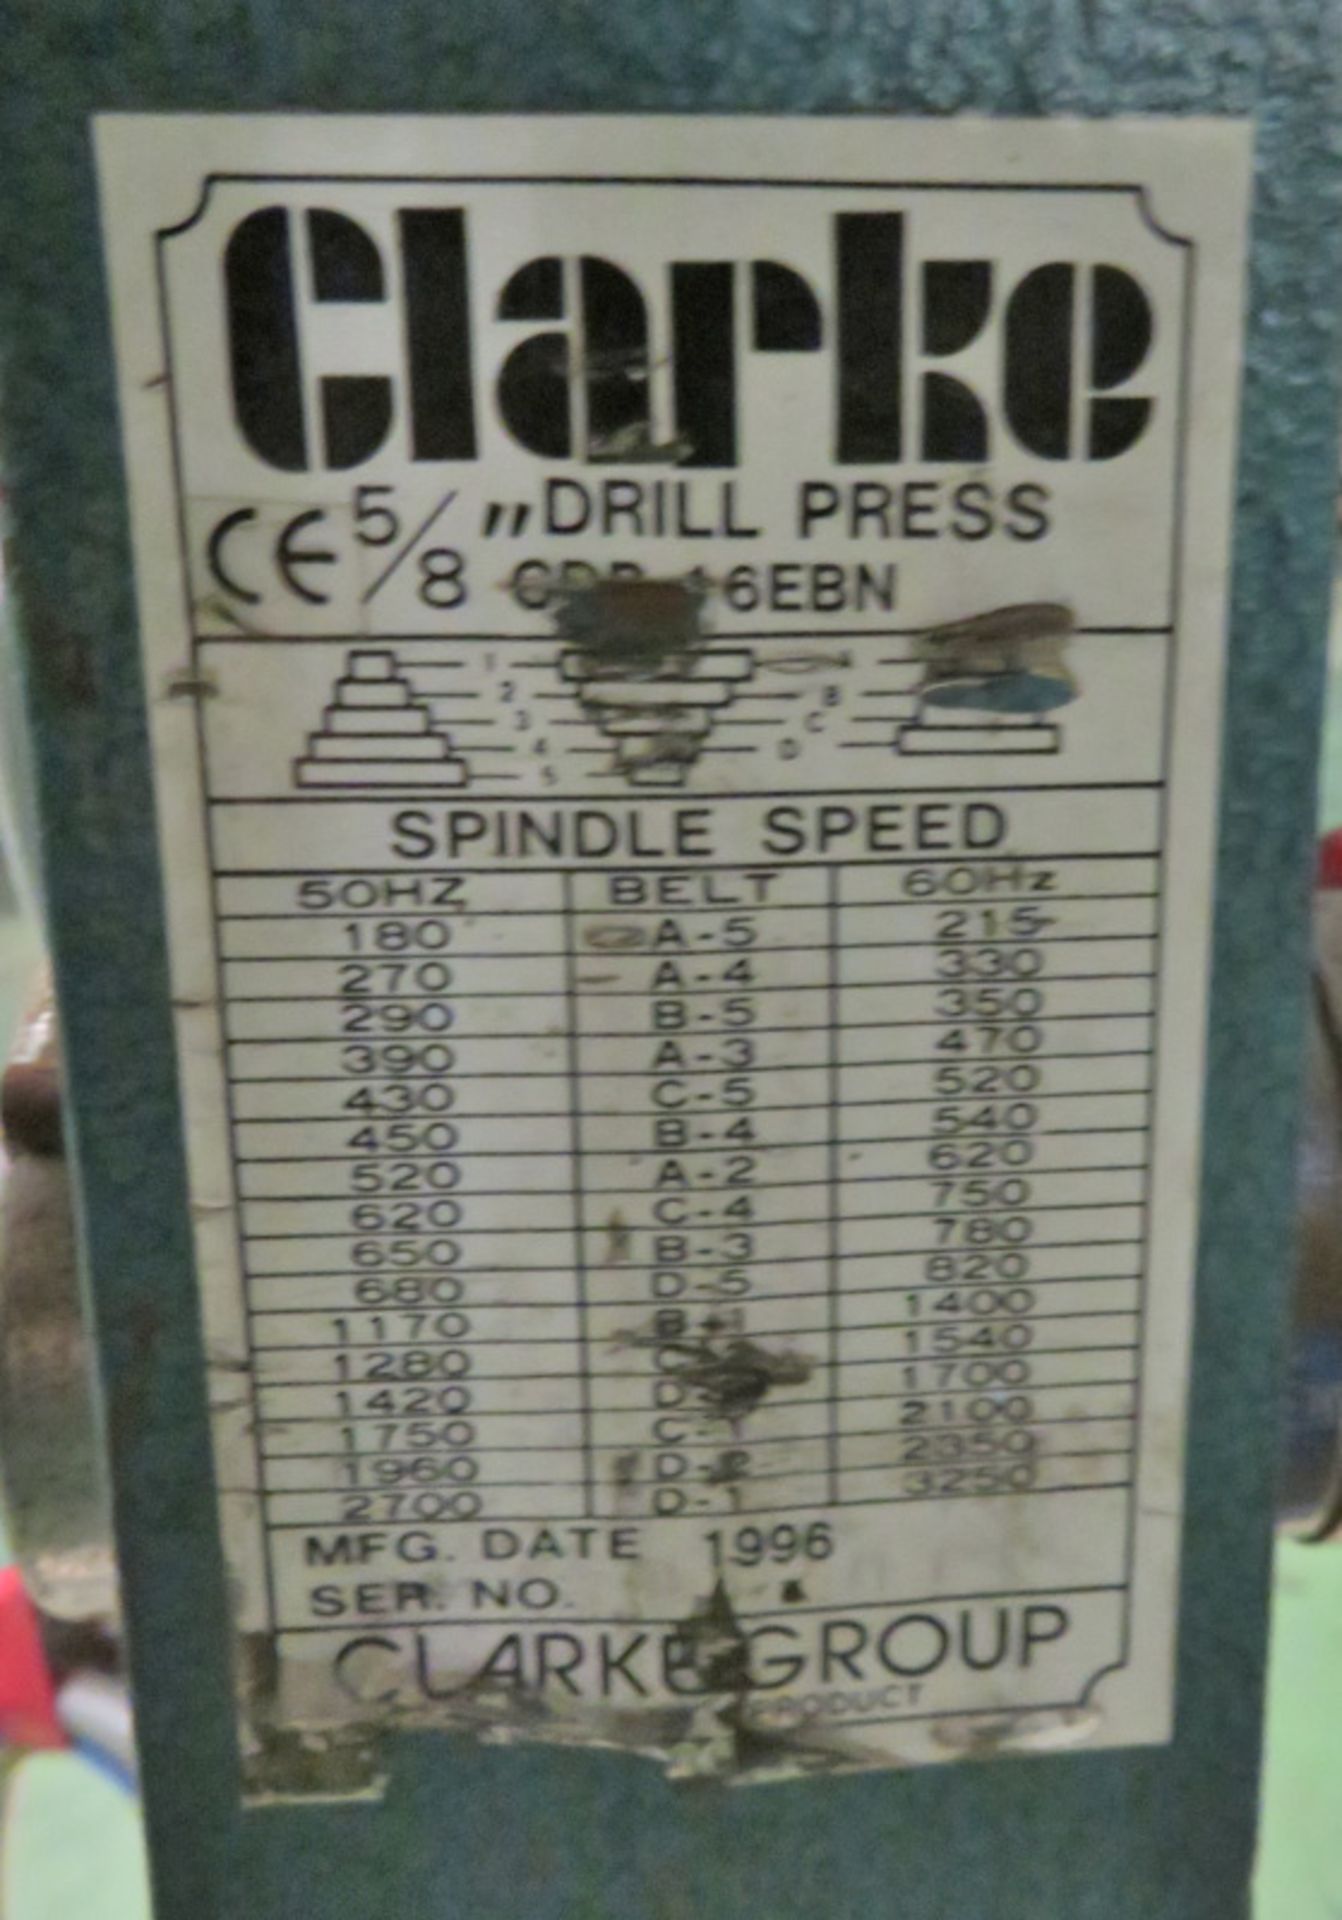 Clark 5/8 inch Bench Drill Press - Image 4 of 4